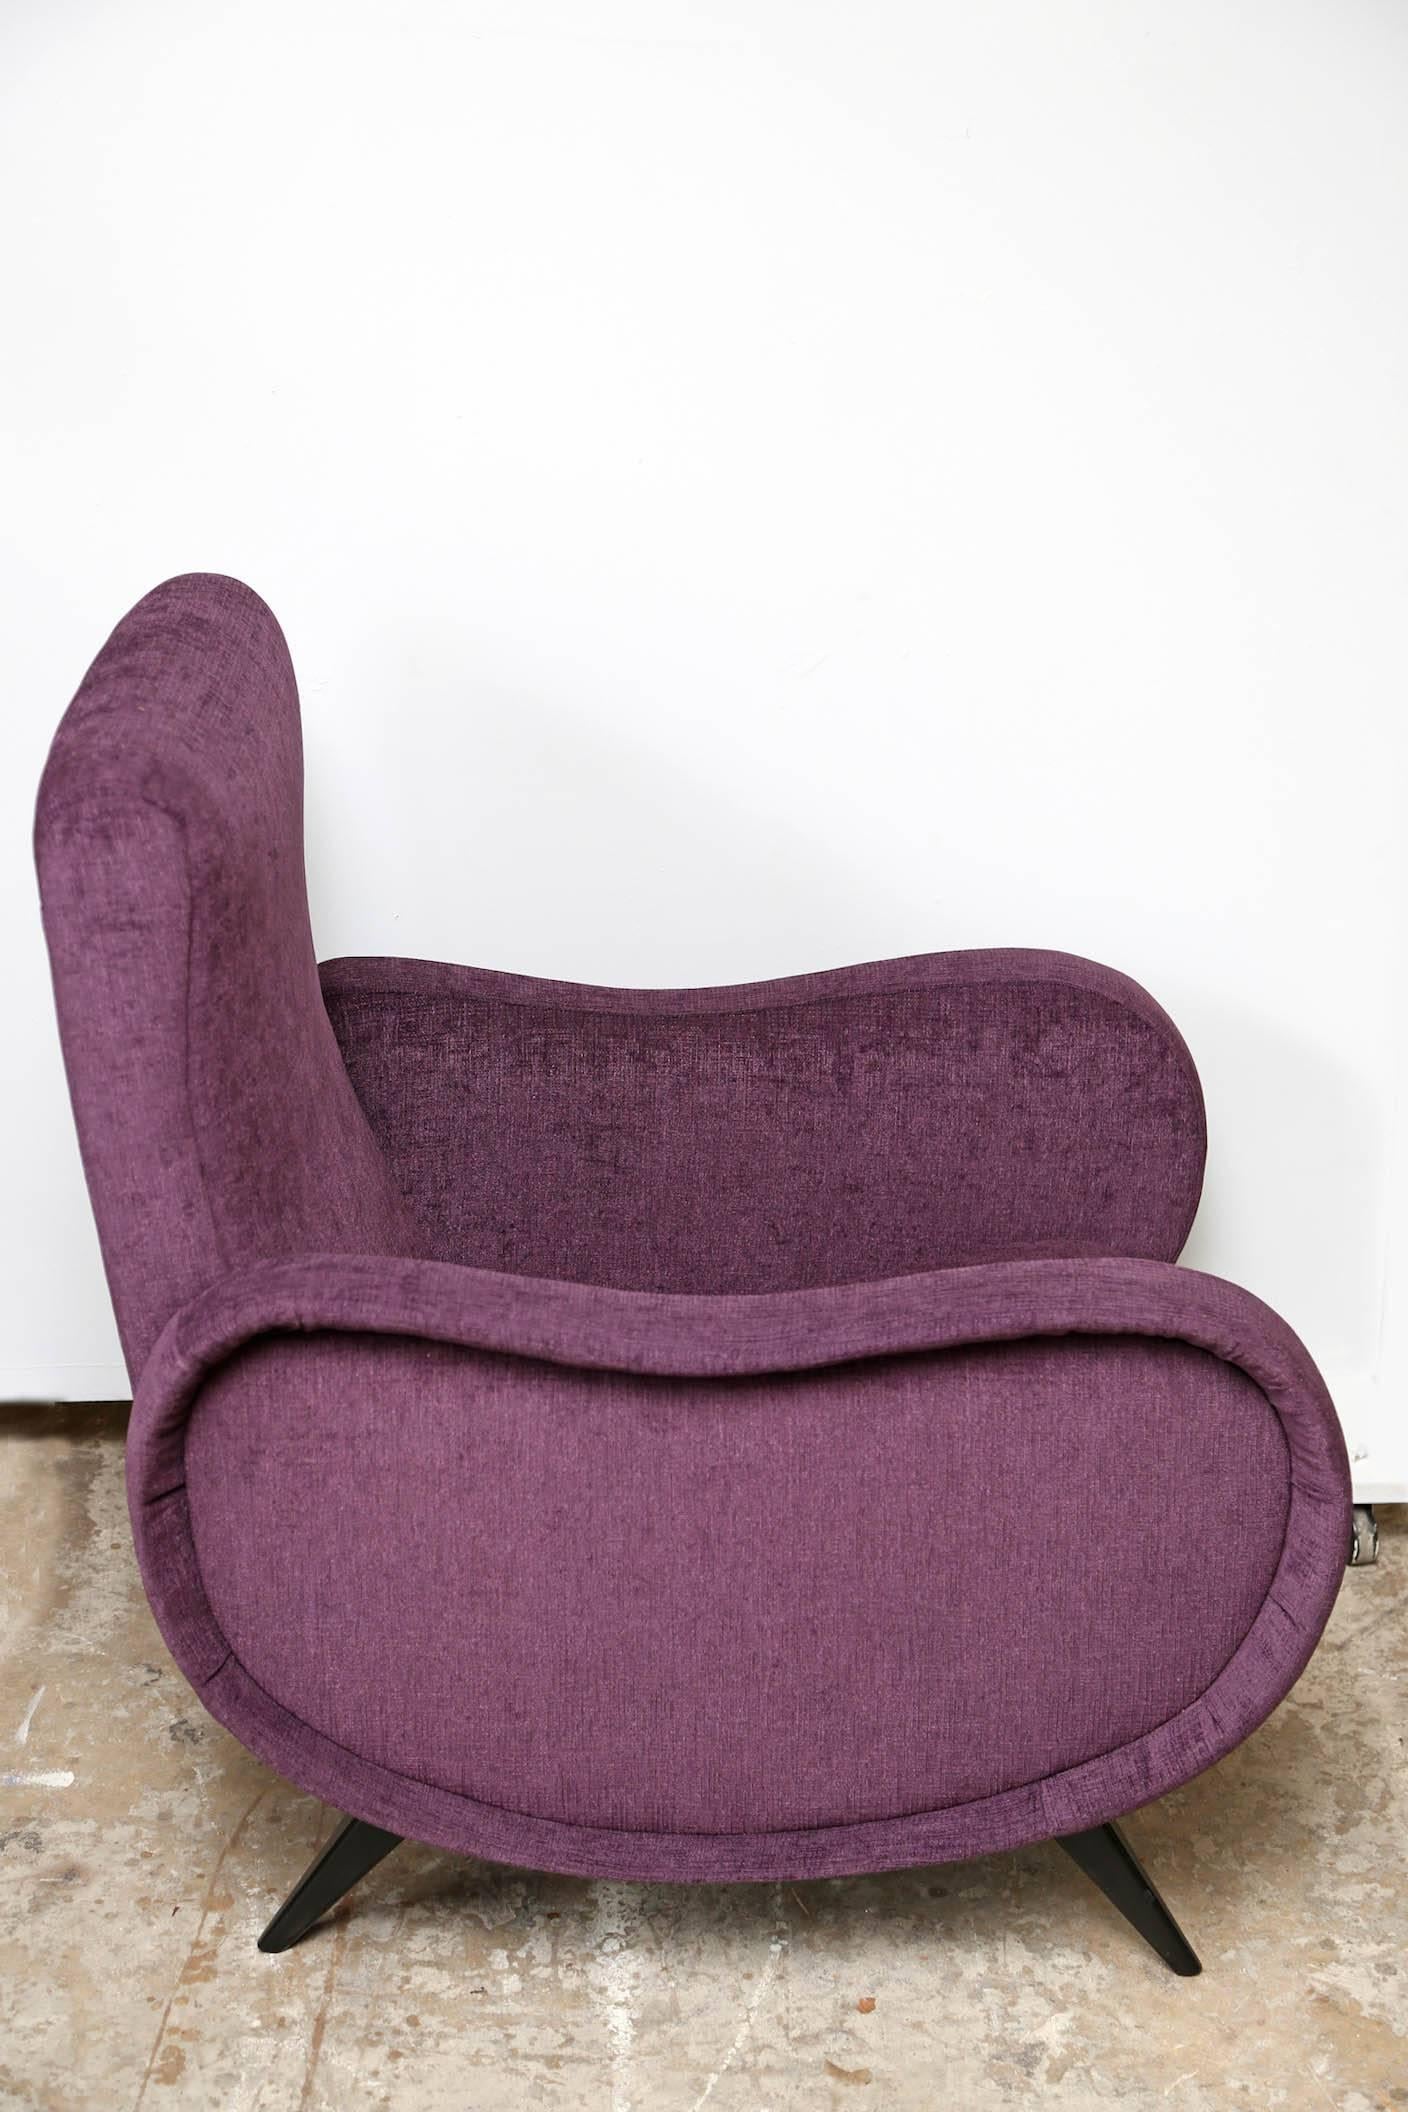 Italian midcentury recently refinished armchairs 
In the style of the Marco Zanuso Lady chair,
soft plum velvet fabric, very comfortable seats, elegant design.